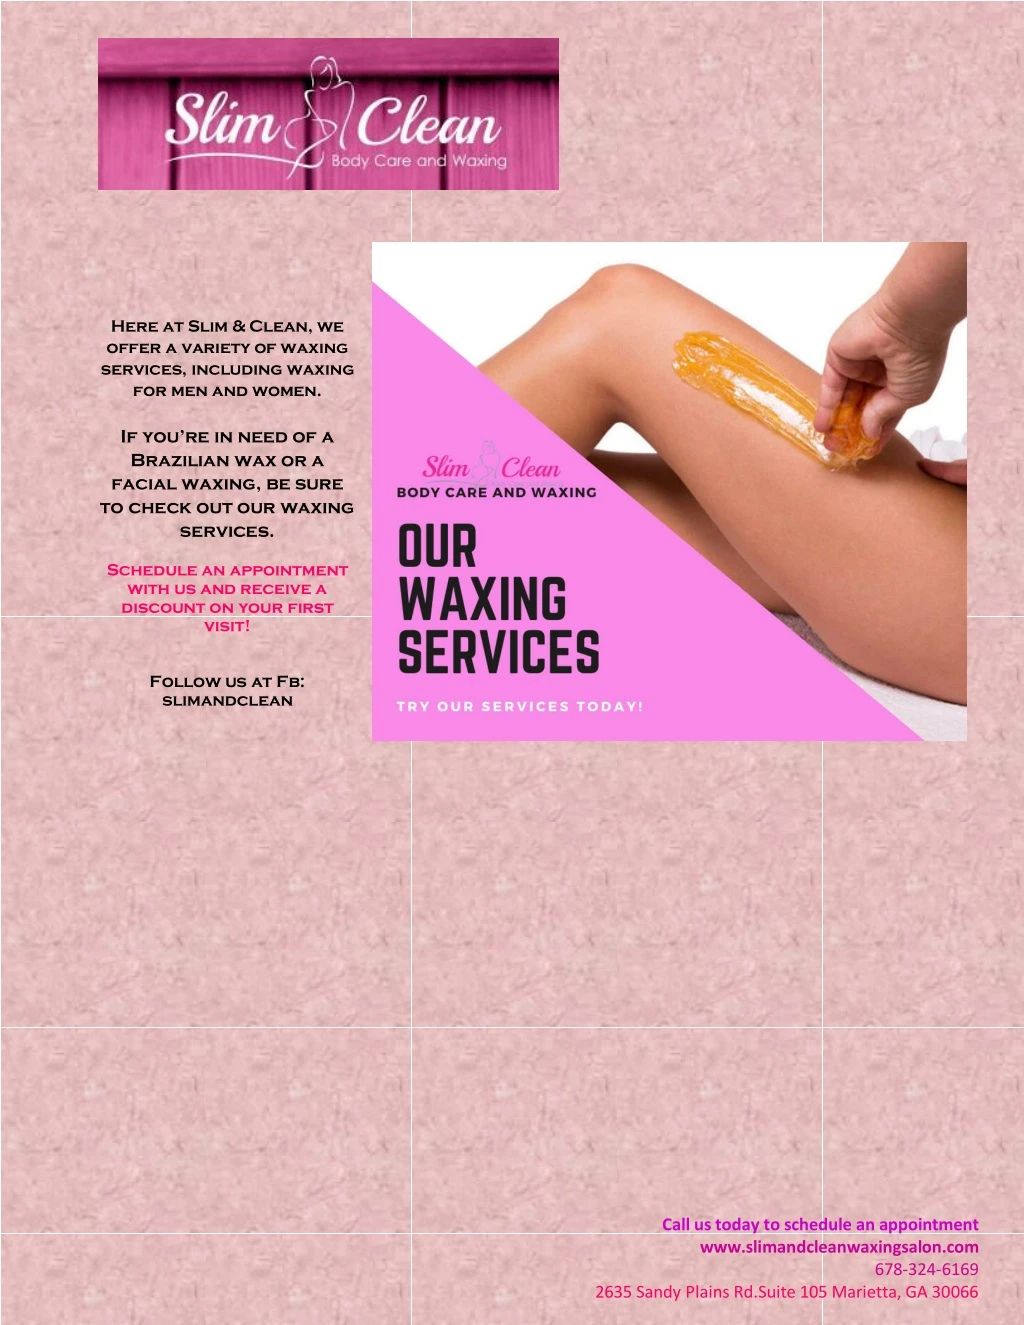 here at slim clean we offer a variety of waxing